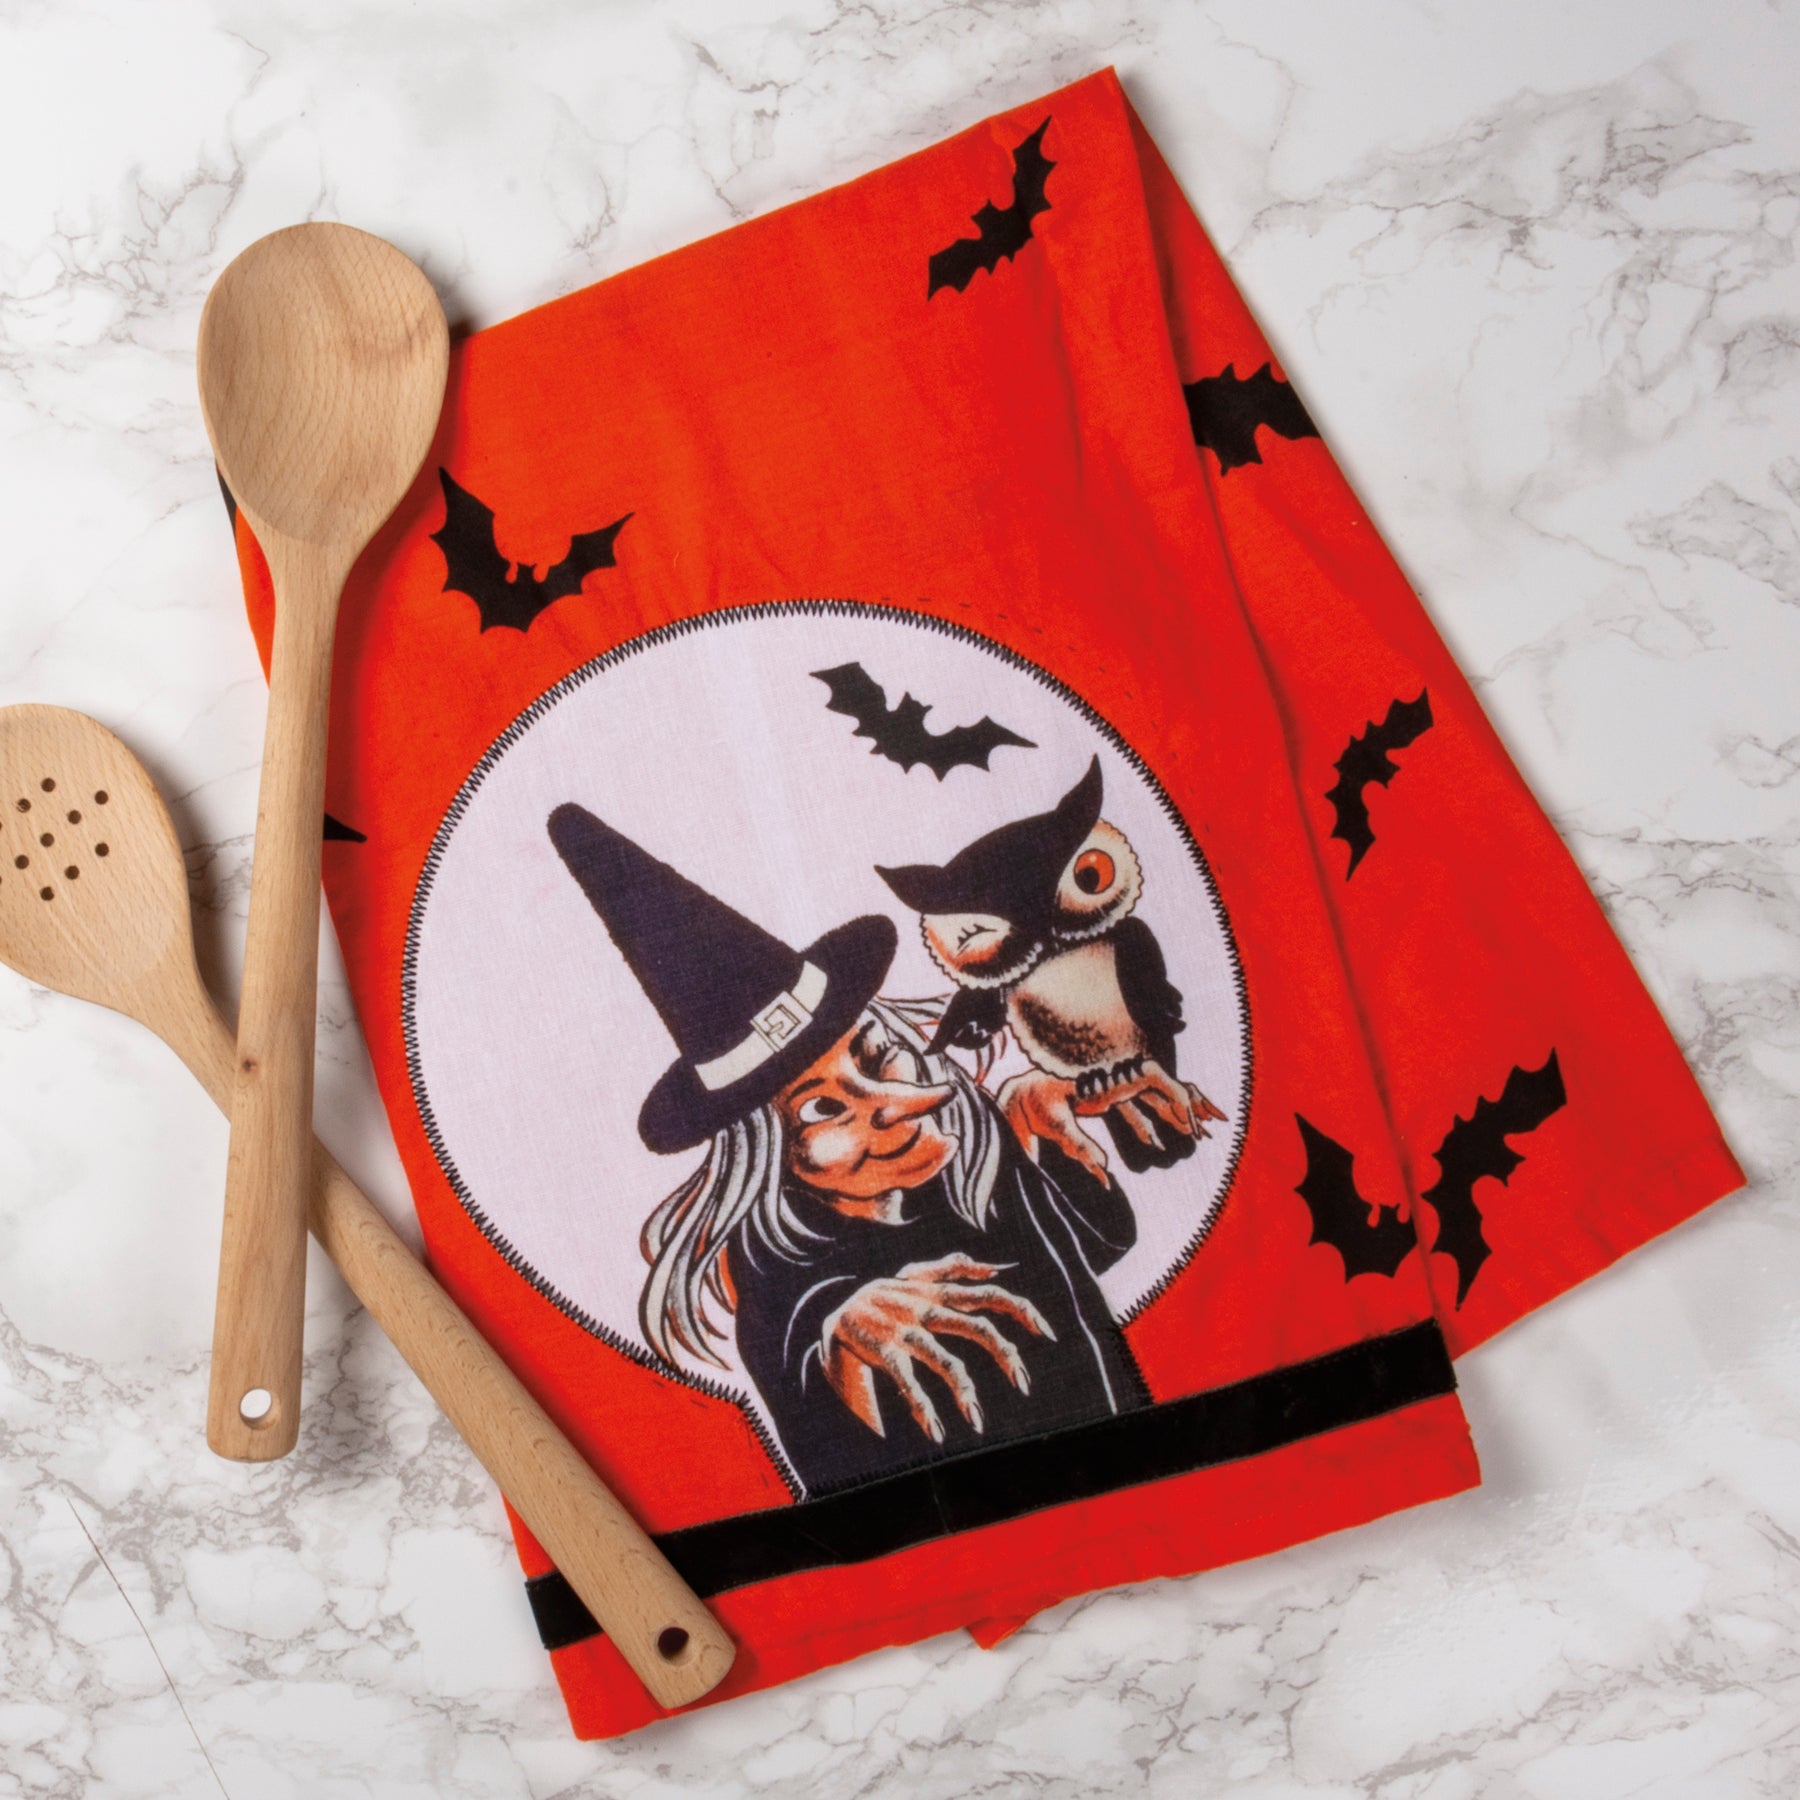 Vintage Styled "Witch " Kitchen Towel